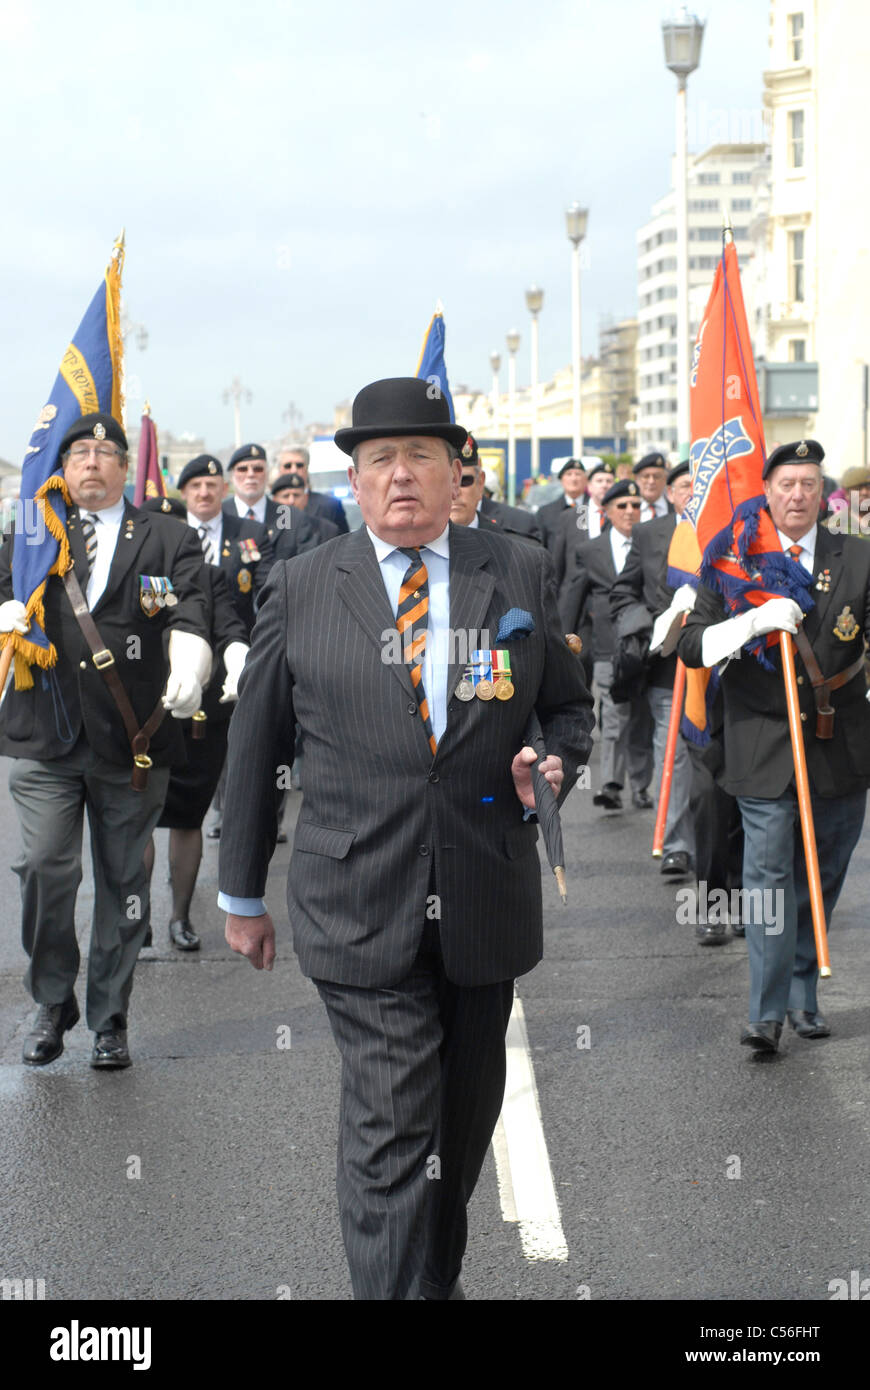 World War Two veterans march with soldiers of the 2nd Battalion The Princess of Wales's Royal Regiment  parade in Brighton. UK. Stock Photo